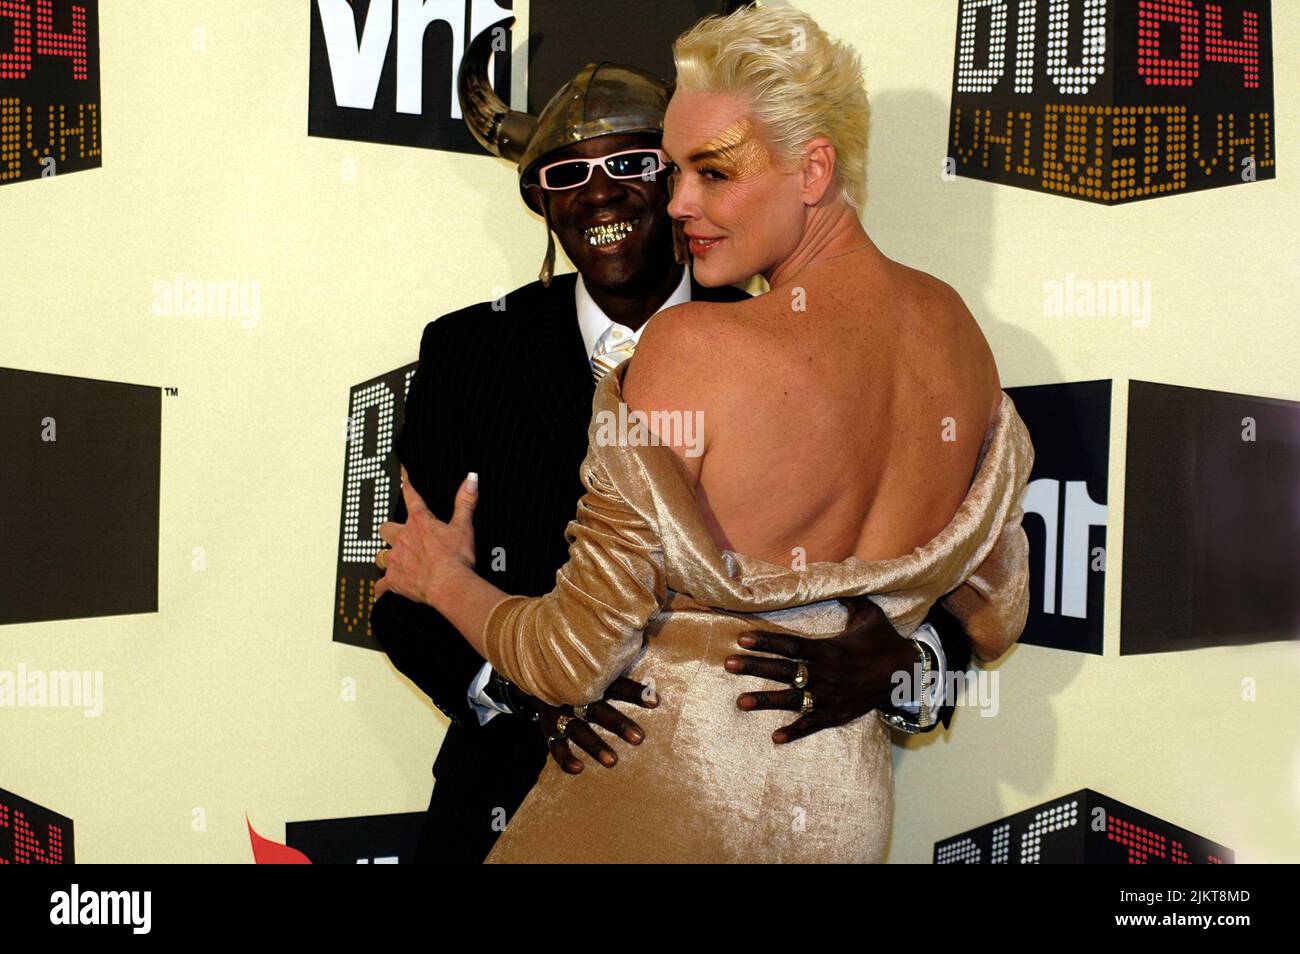 The Flavor Flav and Brigitte Nielsen on the red carpet at VH1 Big in 04 in Los Angeles Stock Photo